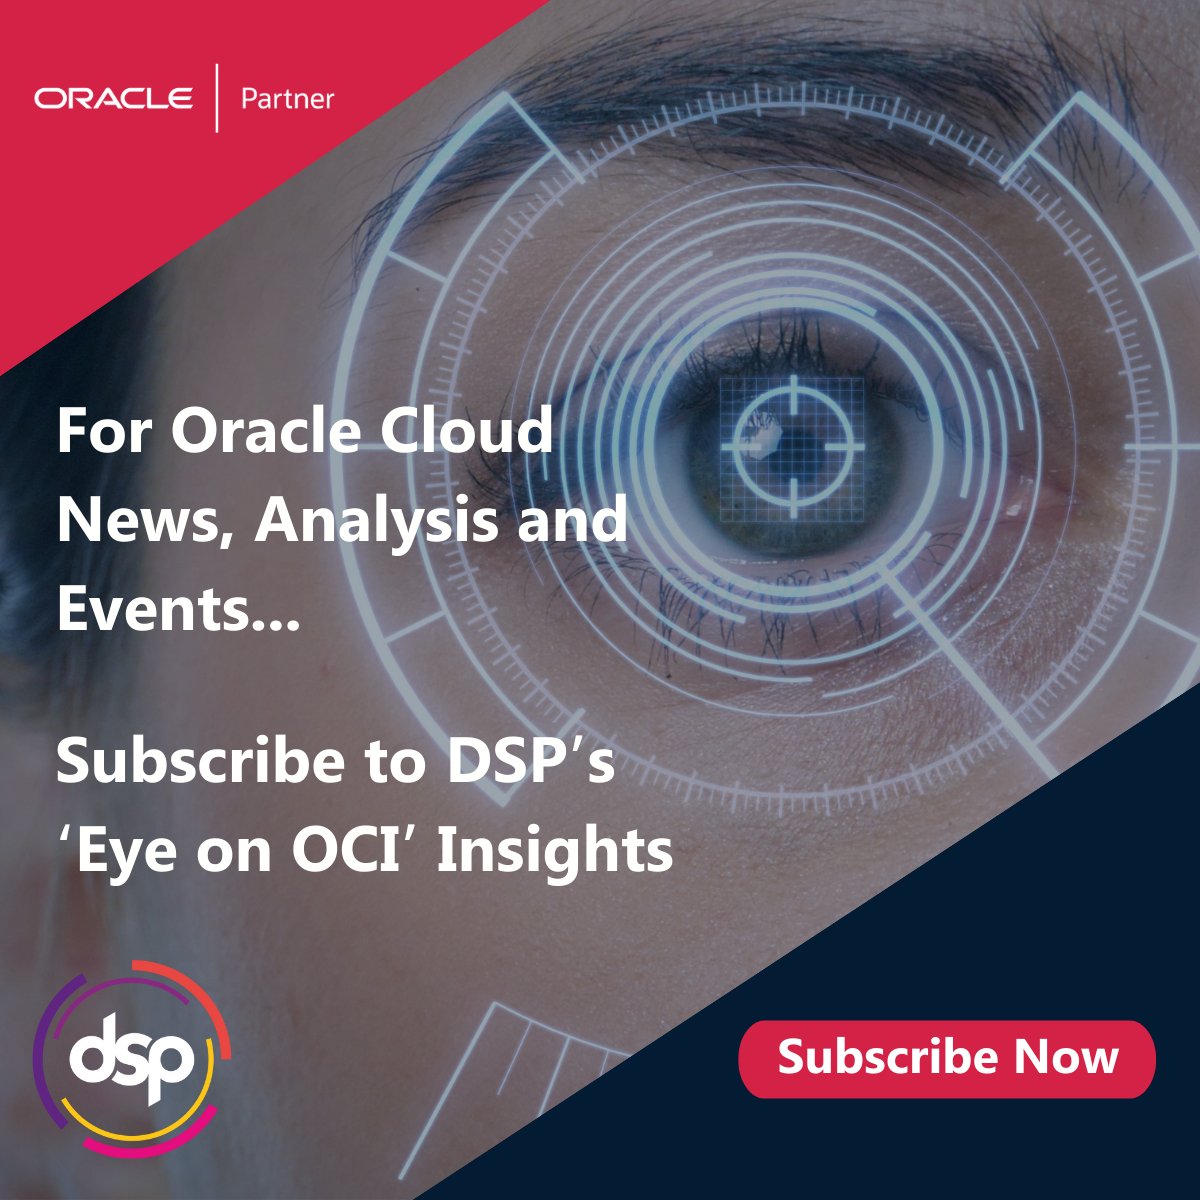 Get the lowdown on the latest developments in Oracle Cloud from the foremost UK Oracle Partner, DSP. With 100s of experts and 25 years of working with Oracle technology, there's no one better to help you navigate the world of Oracle Cloud! bit.ly/3TAtEfU #Oracle #OCI